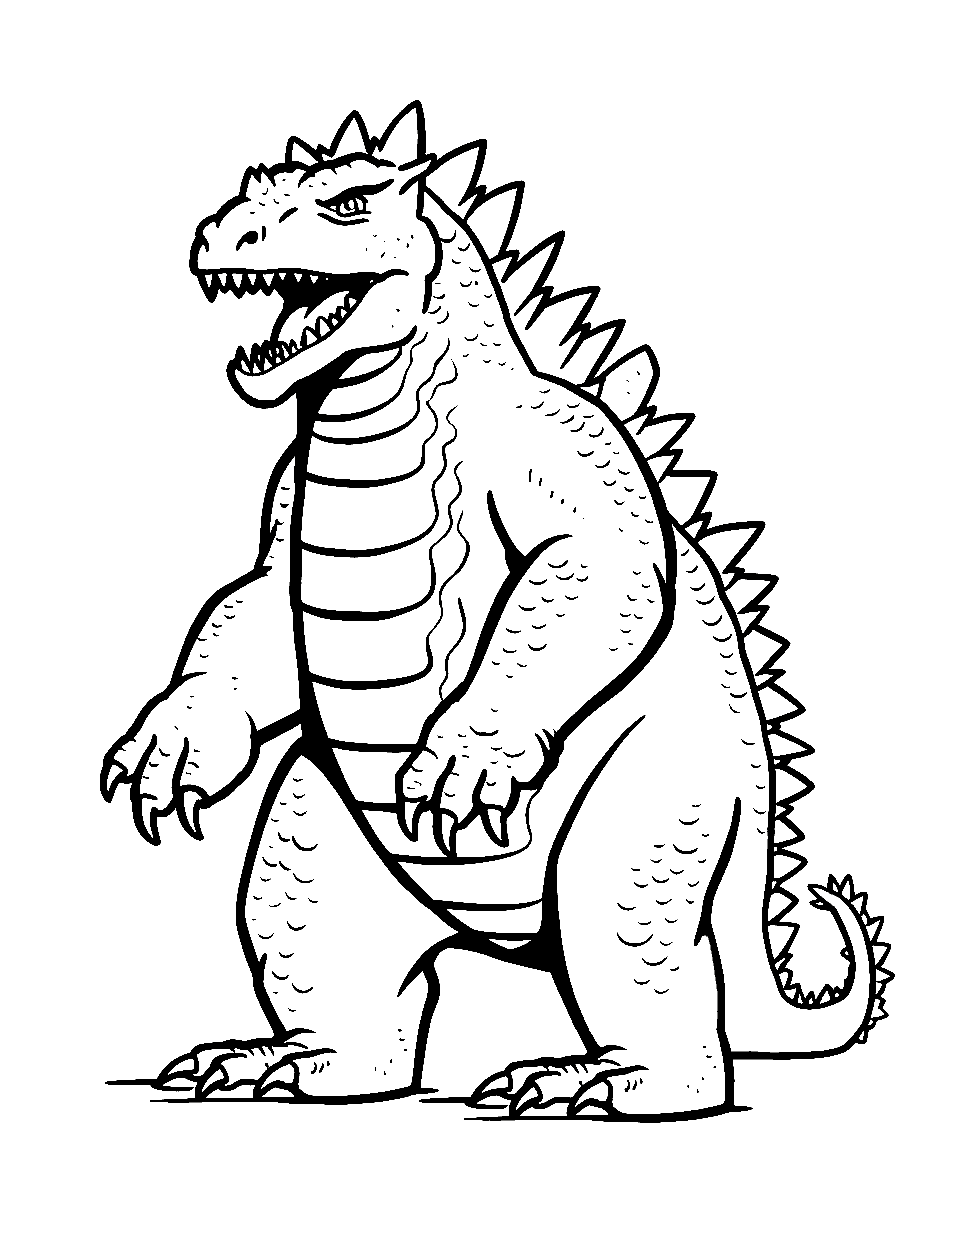 37 Legendary Godzilla Coloring Pages Printable 34